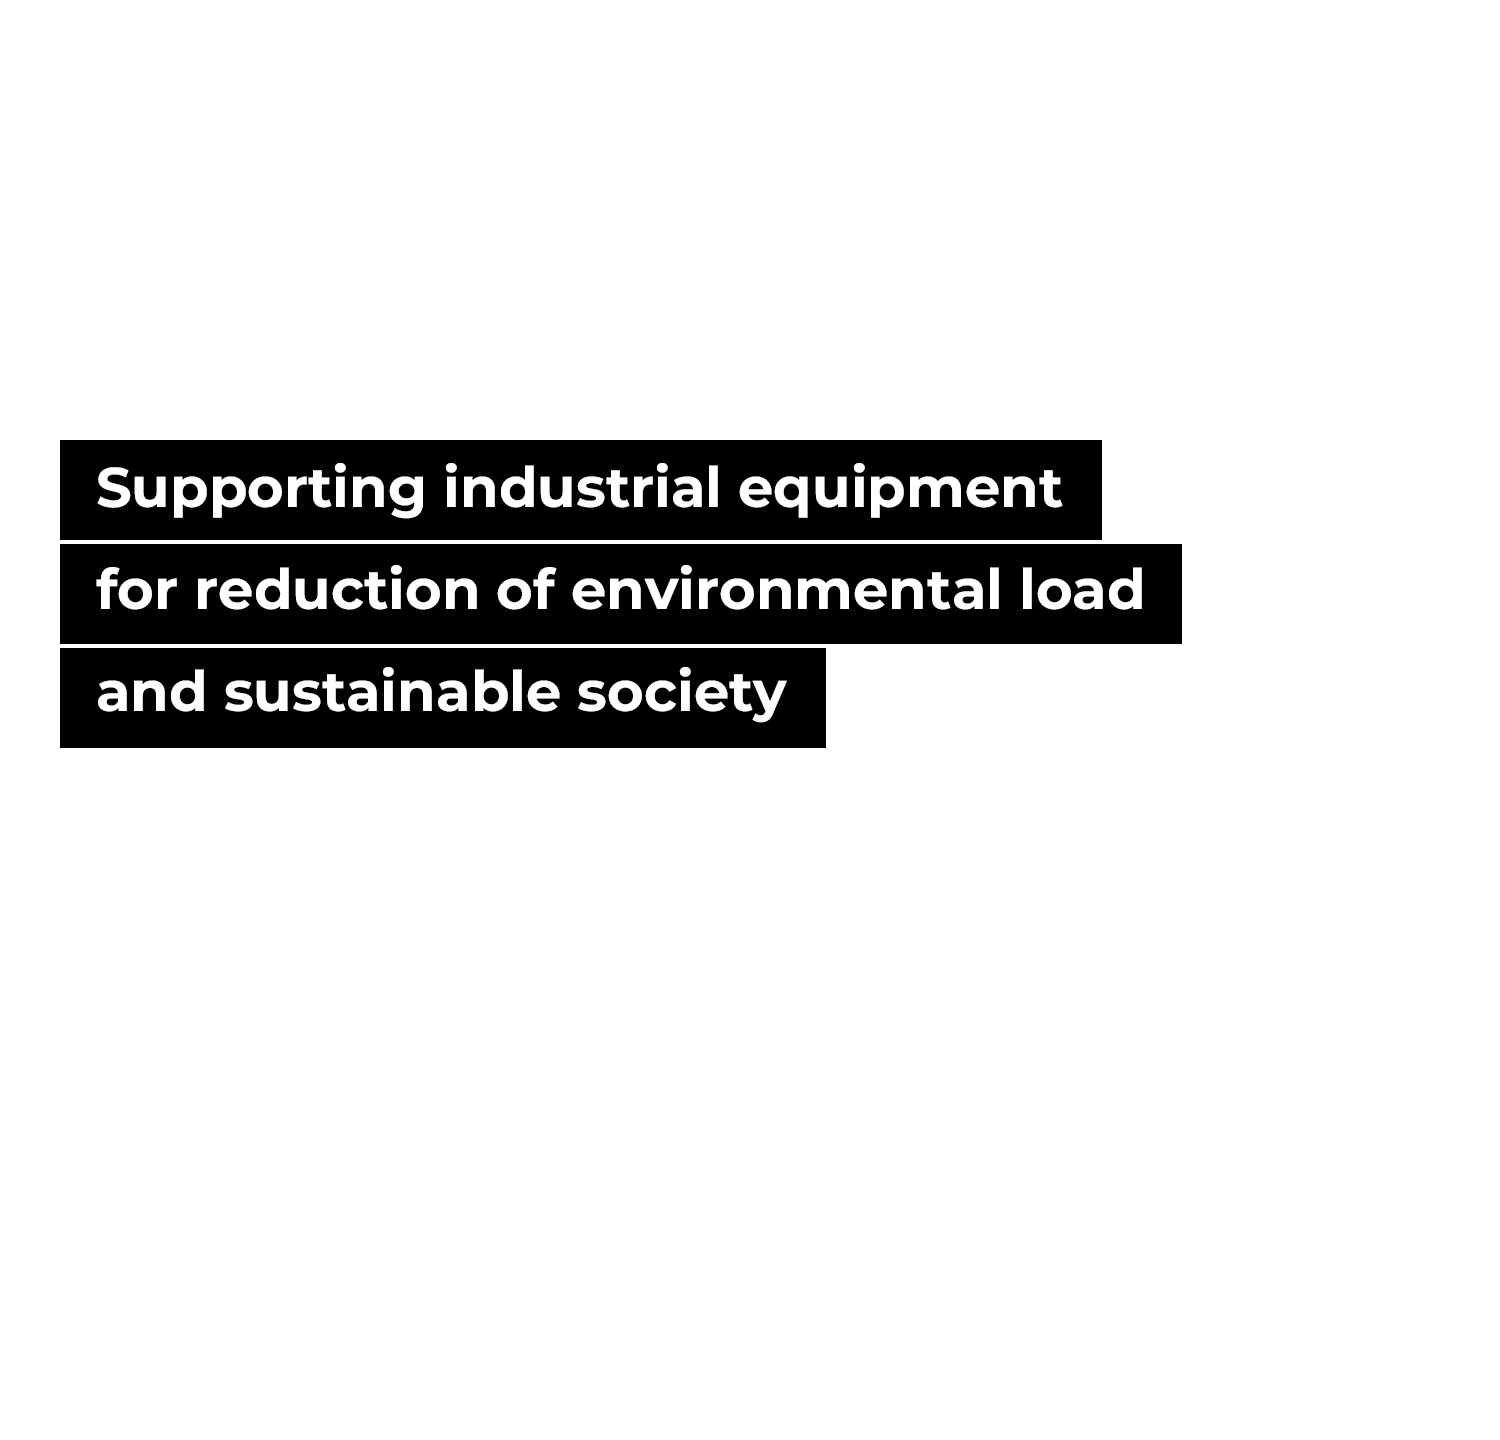 Supporting industrial equipment for reduction of environmental load and sustainable society